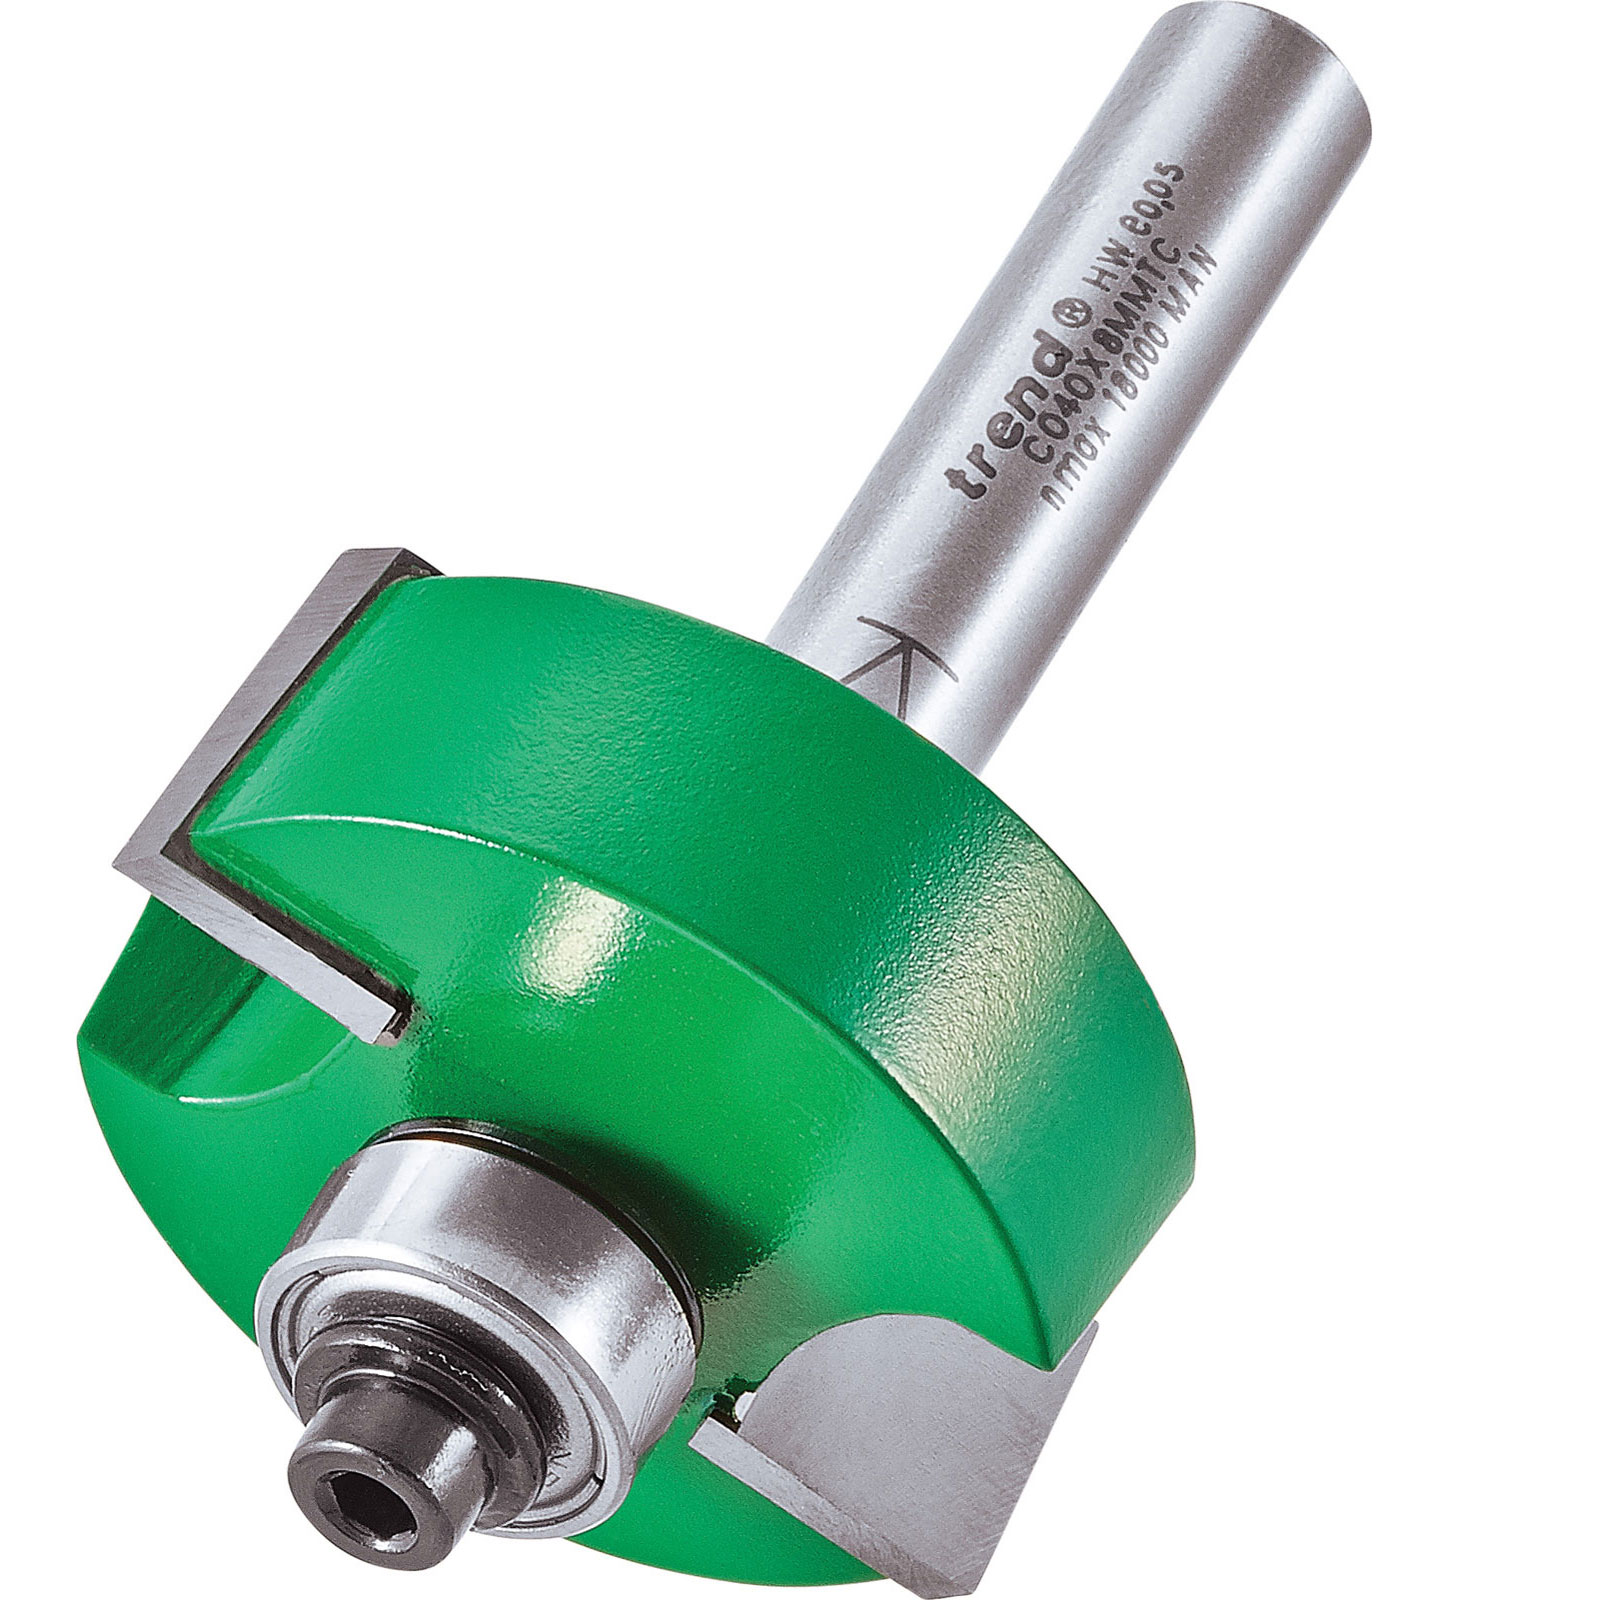 Trend Bearing Self Guided Rebate Router Cutter 35mm 12 7mm 8mm 26 95 